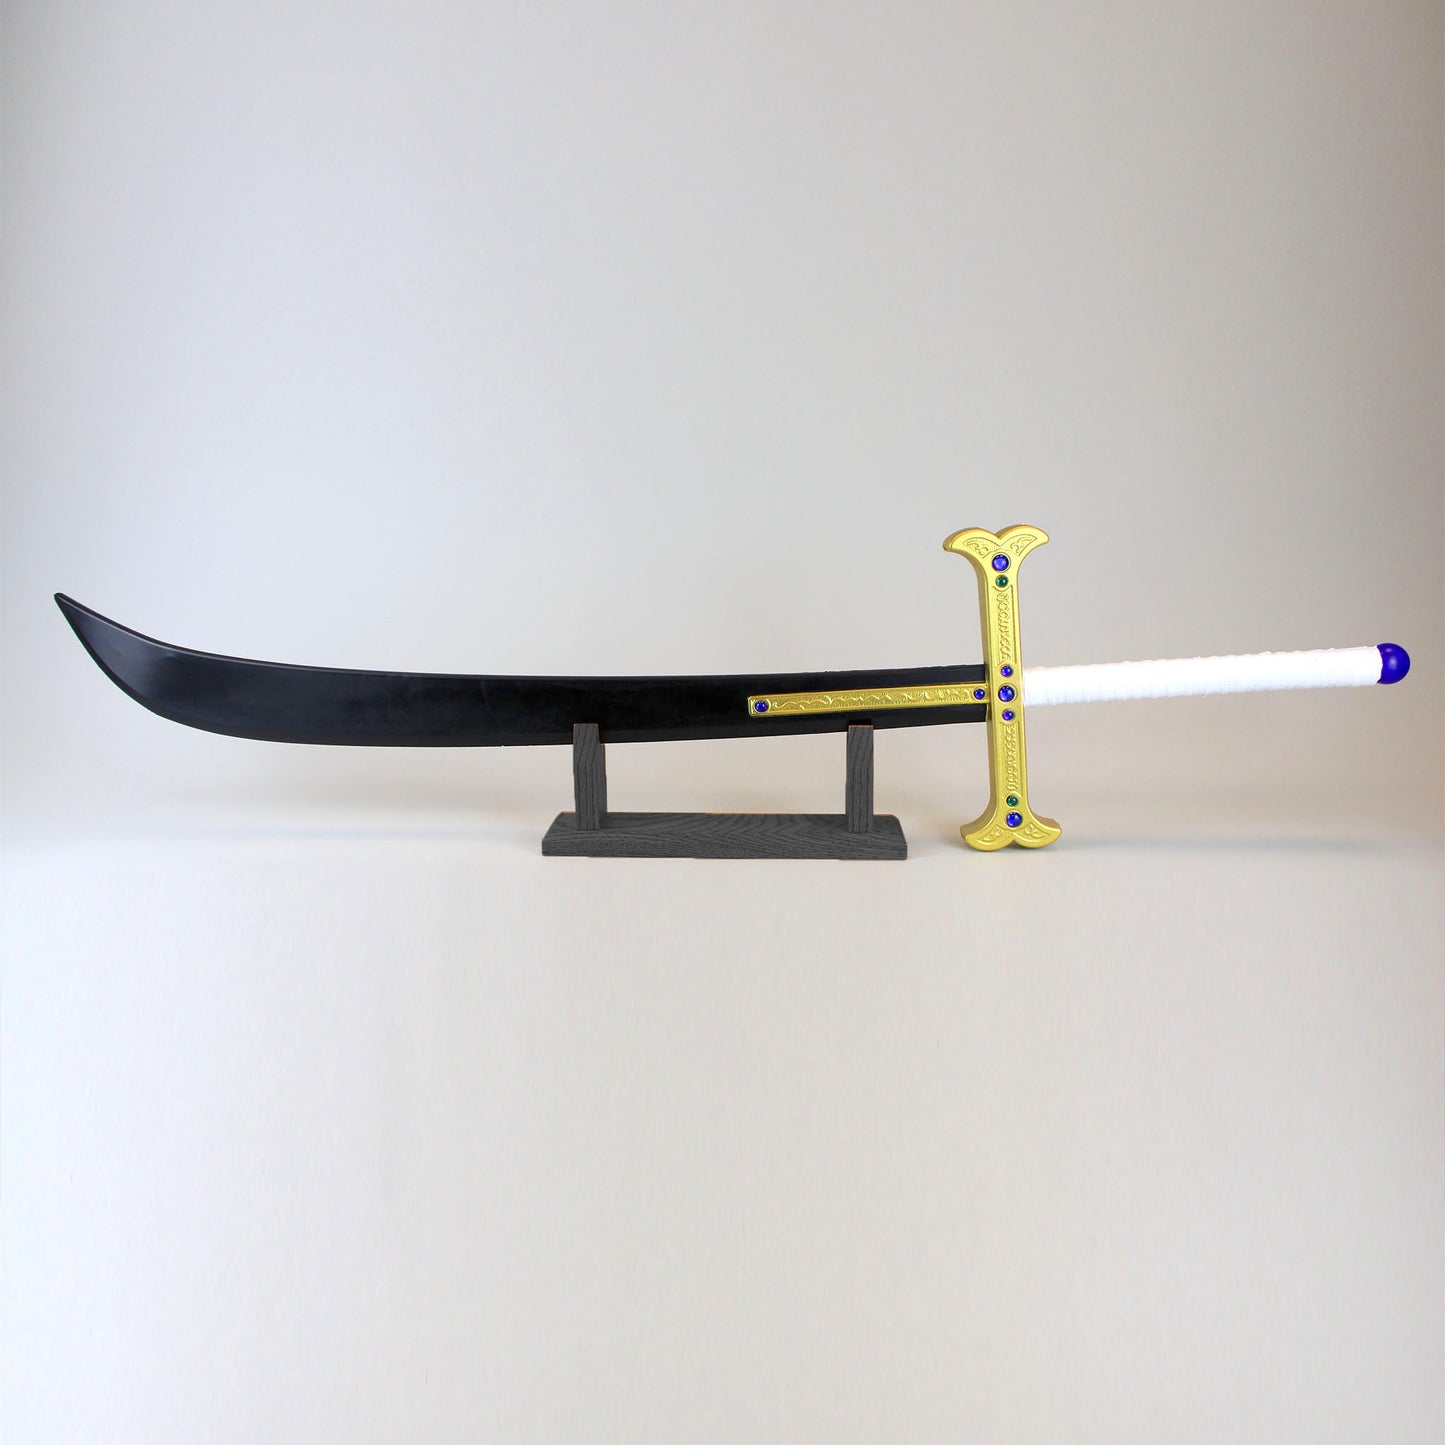 How to make a sword out of paper ❘ One Piece ❘ Yoru, Mihawk's Sword 